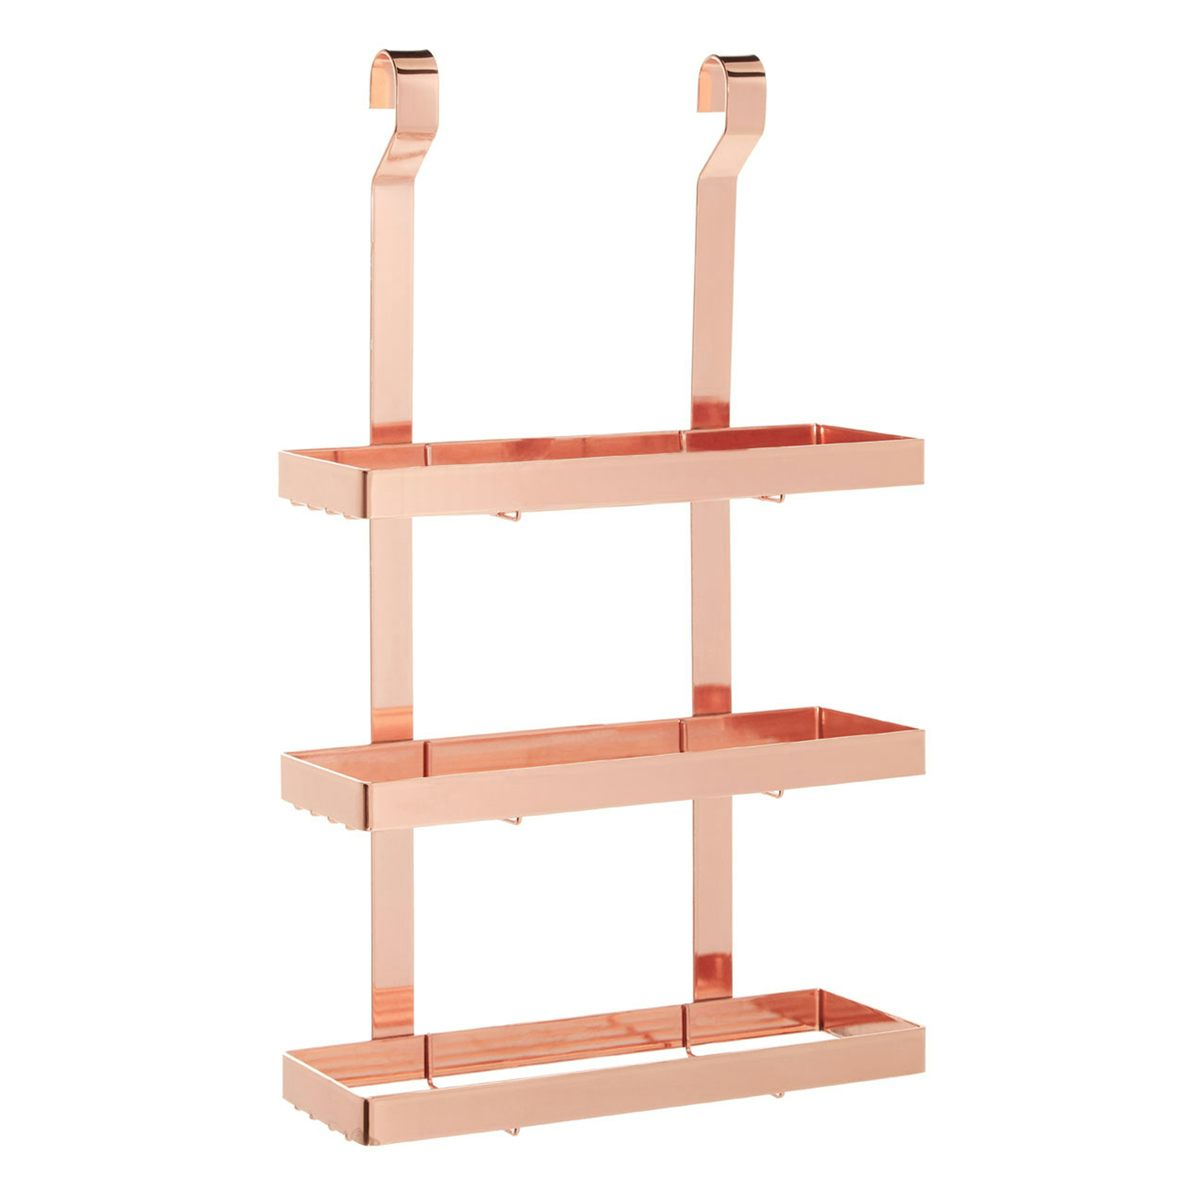 Accents Hanging 3 tier shelf unit in rose gold